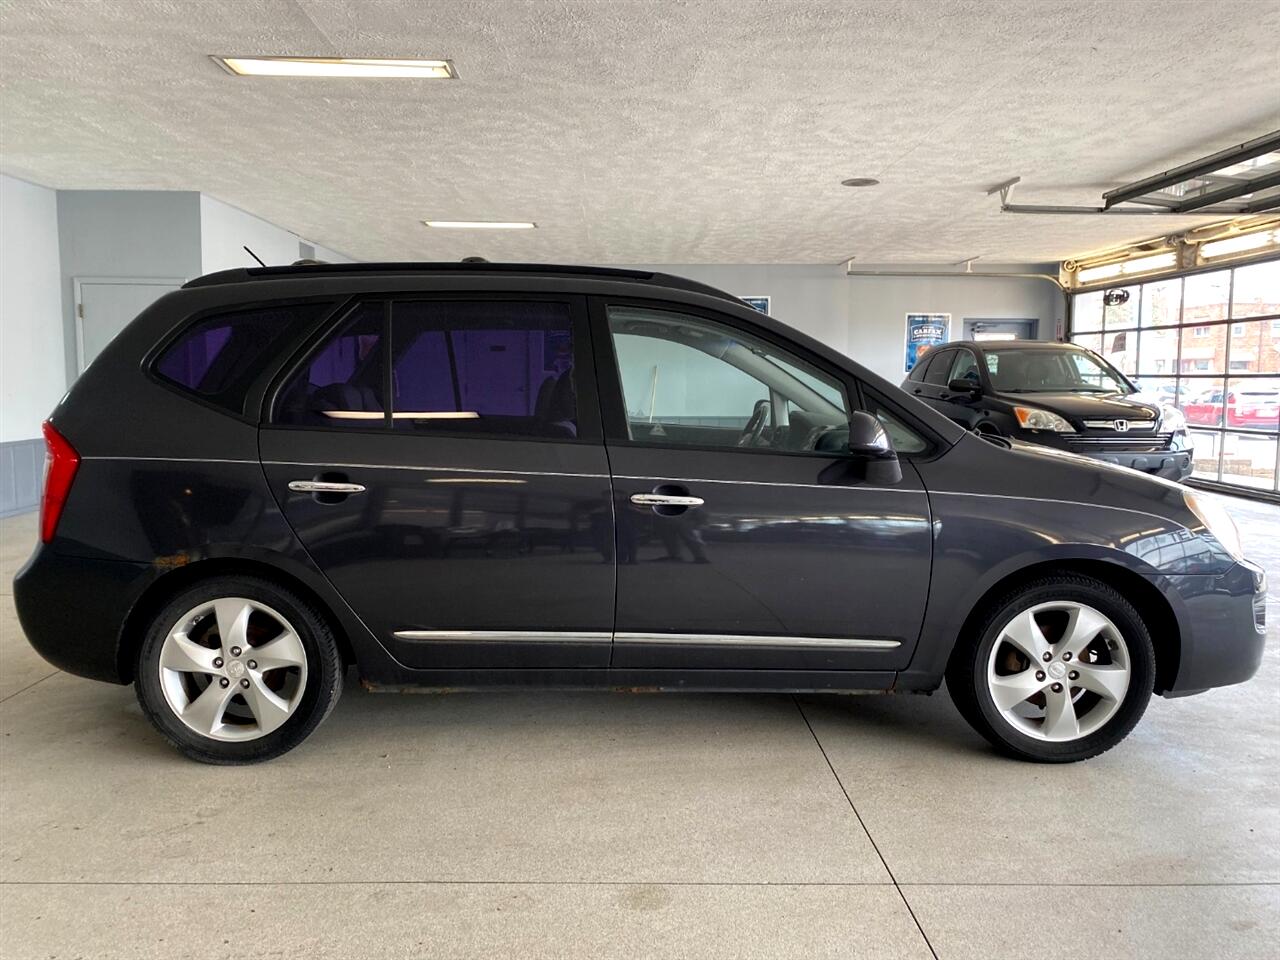 Used 2007 Kia Rondo 4dr V6 Auto LX for Sale in Wadsworth OH 44281 Alpha  Auto Group of Wadsworth